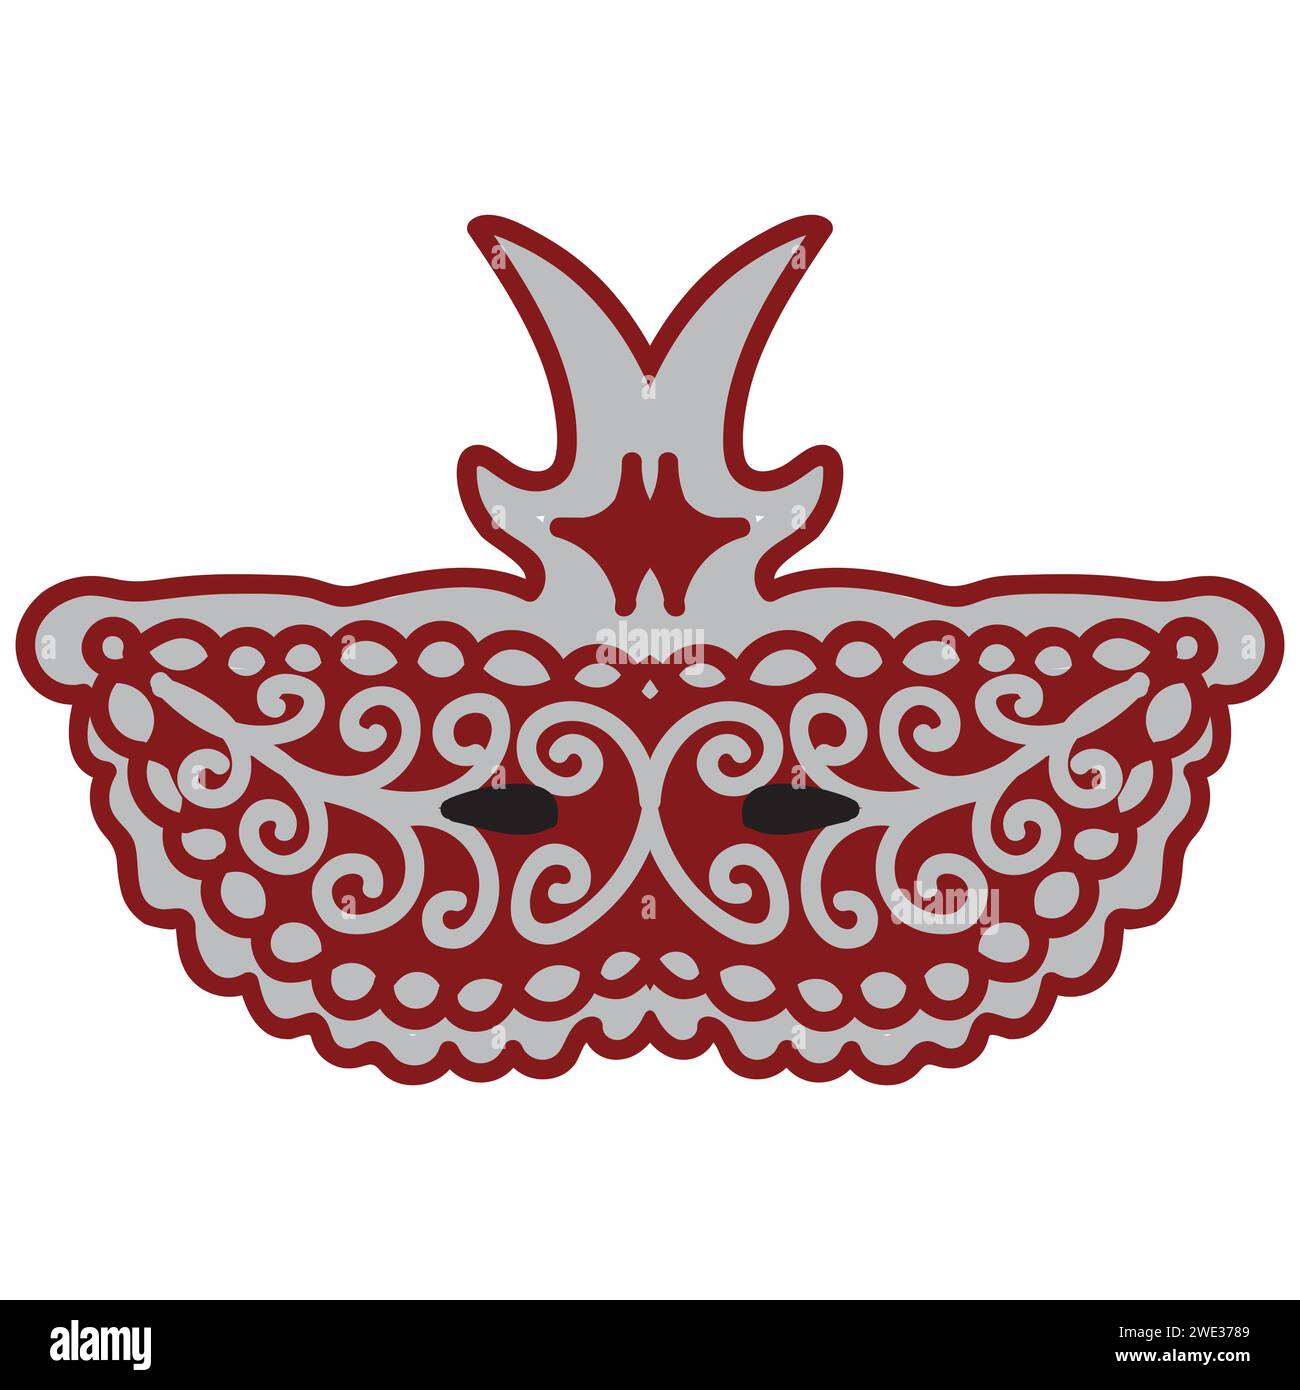 A red masquerade mask decorated with an elegant silver pattern. Vector illustration isolated on white background. Stock Vector